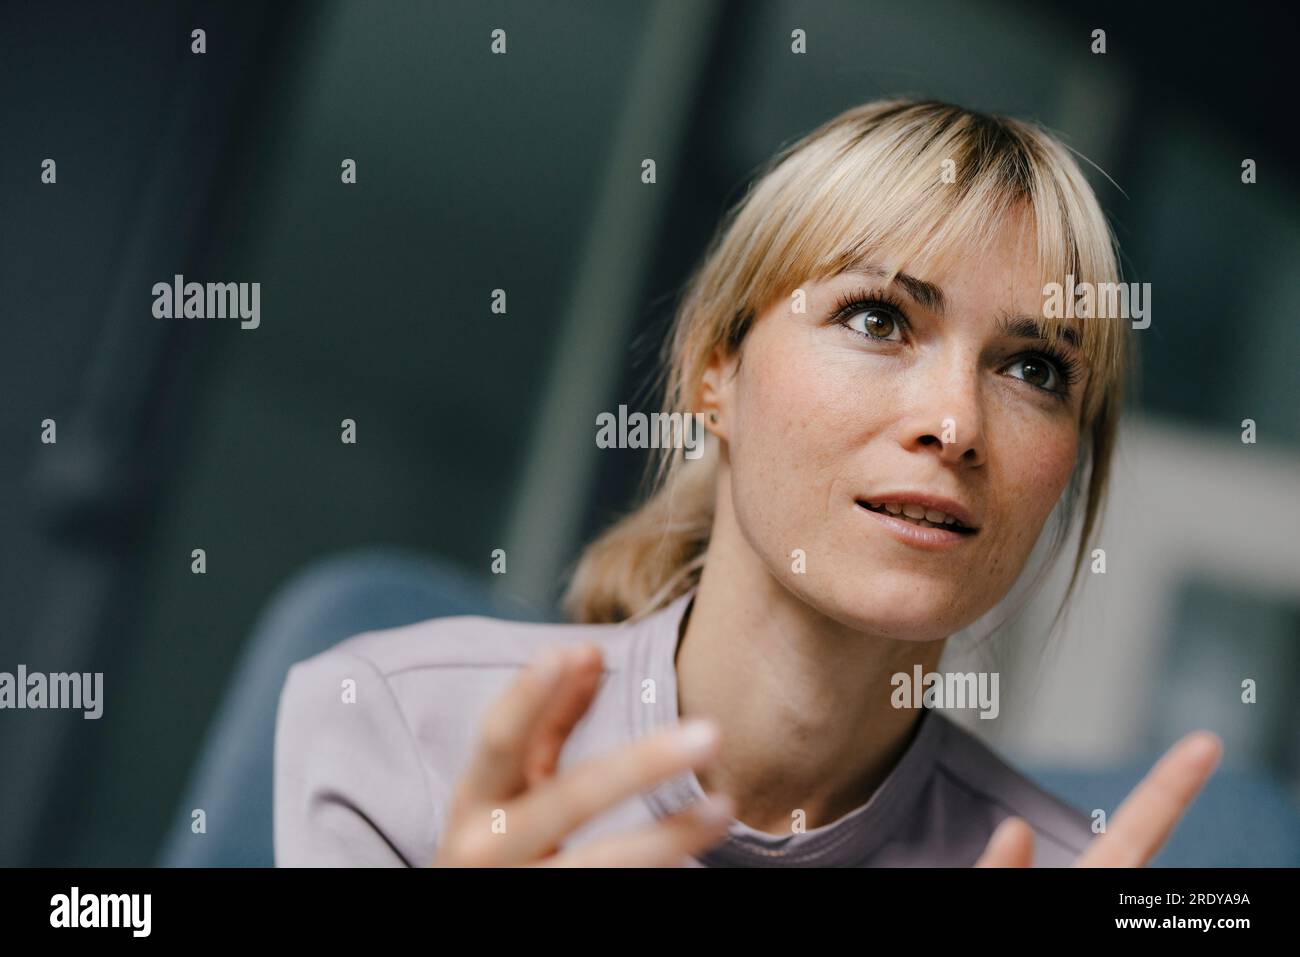 Portrait of a blond businesswoman, talking passionately Stock Photo